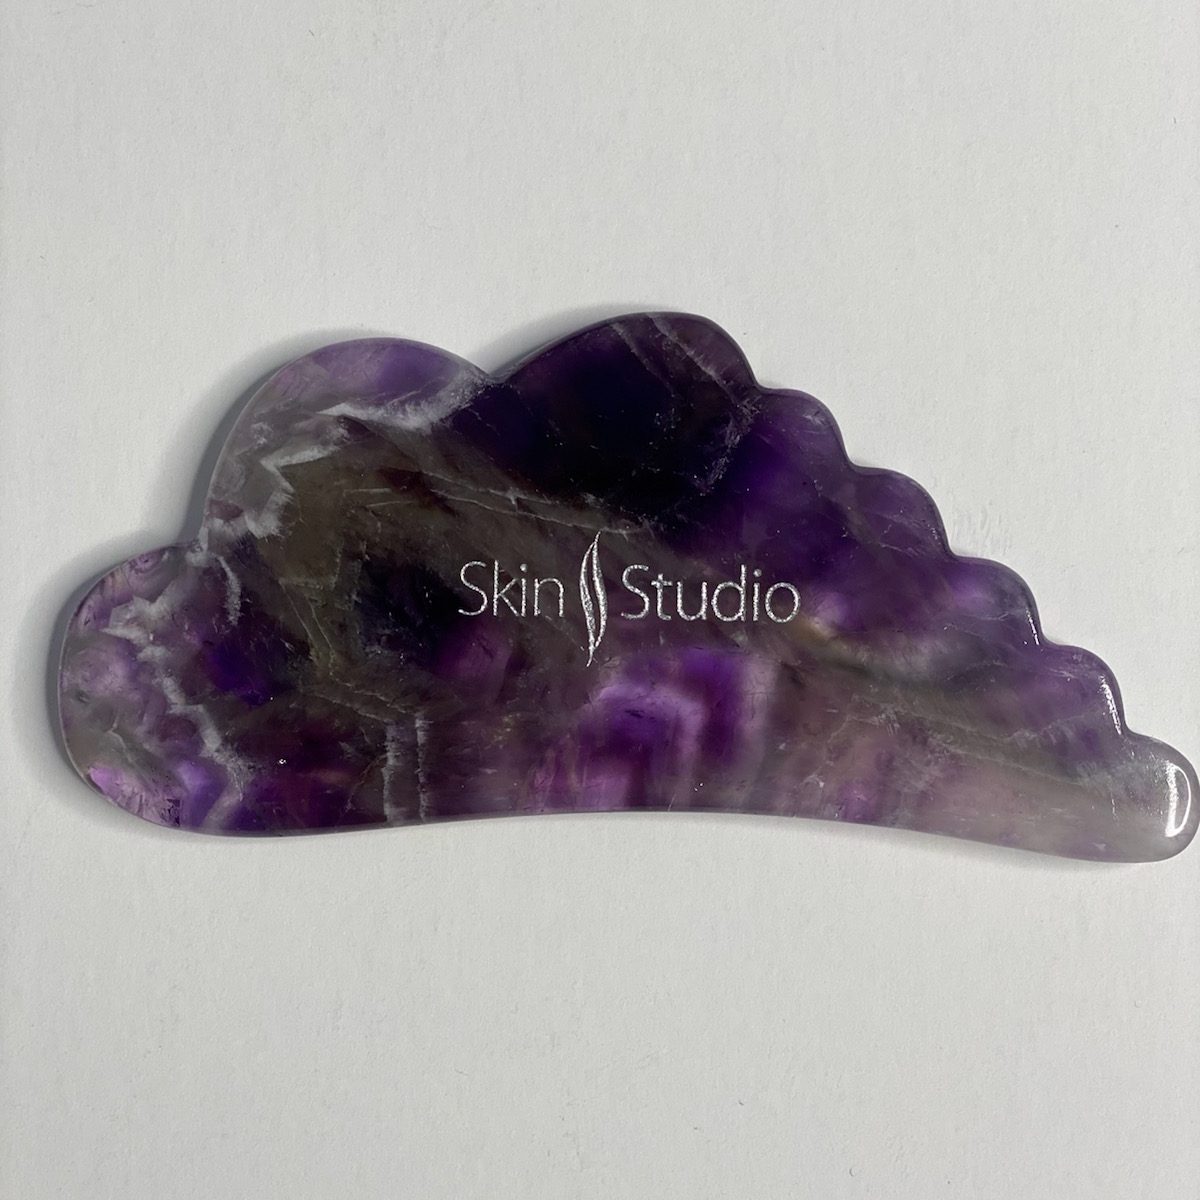 Gua sha tool made out of amethyst & Skin Studio Boston logo on top of it